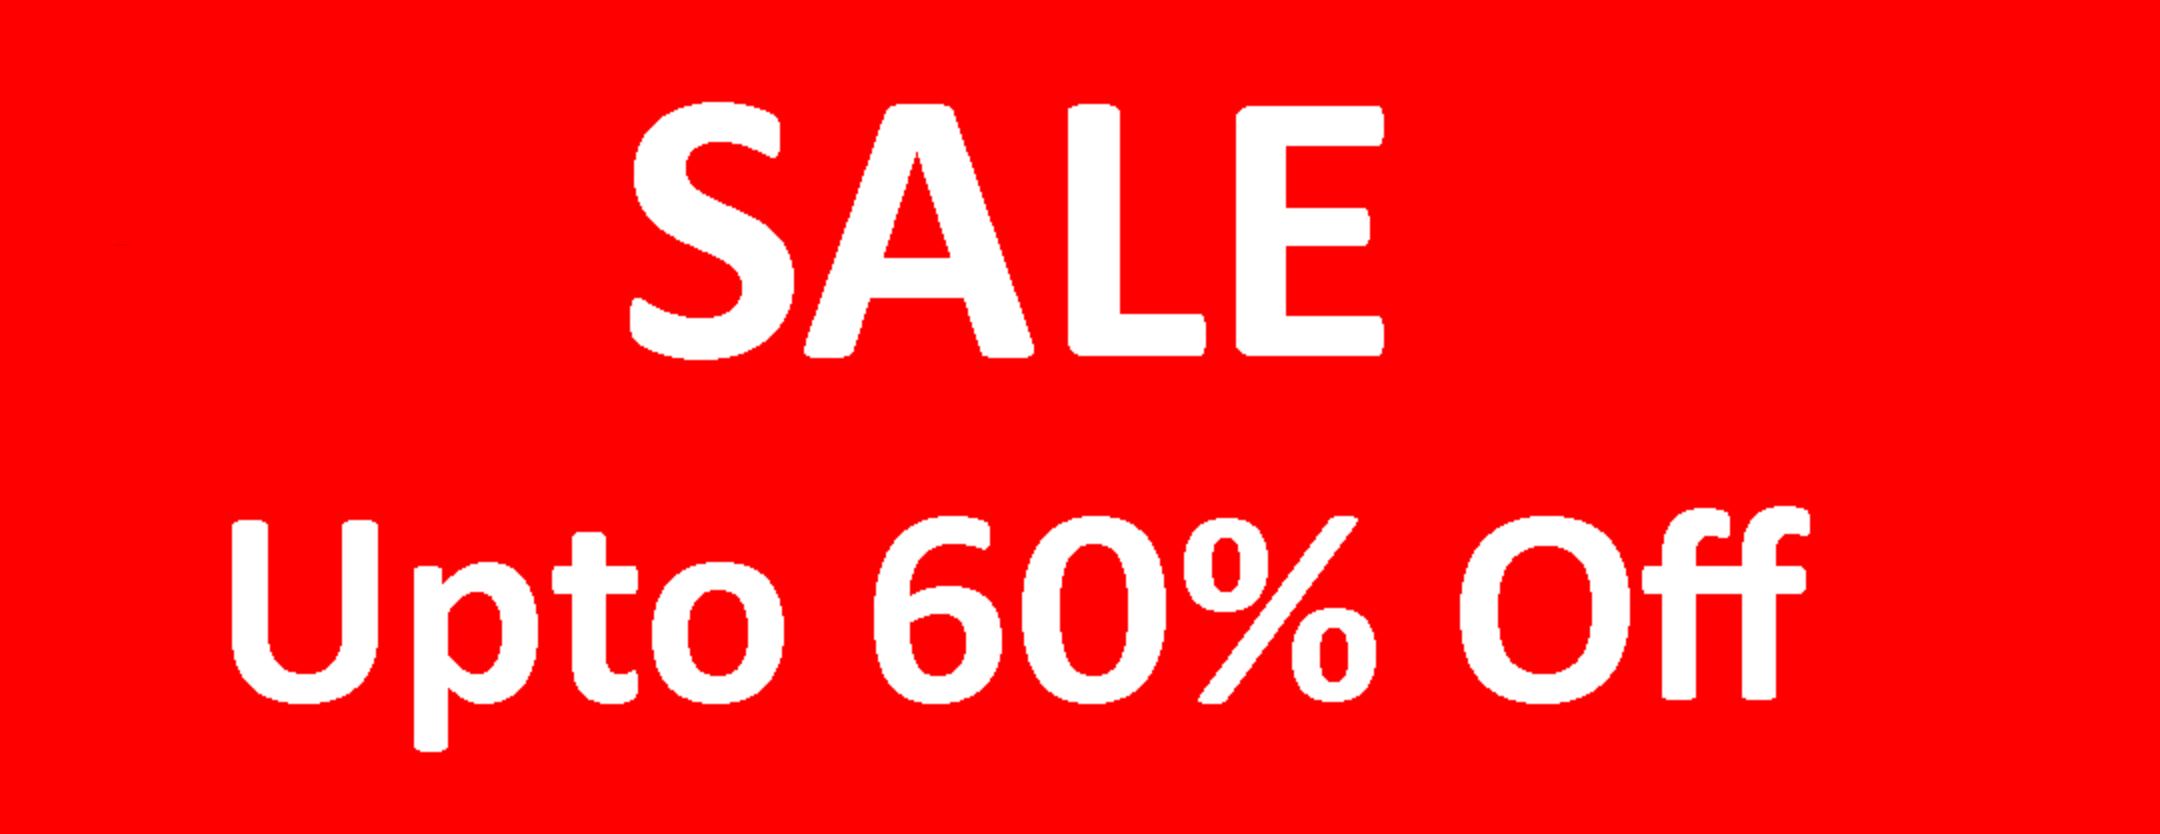 BananaShoes: Sale up to 60% off shoes